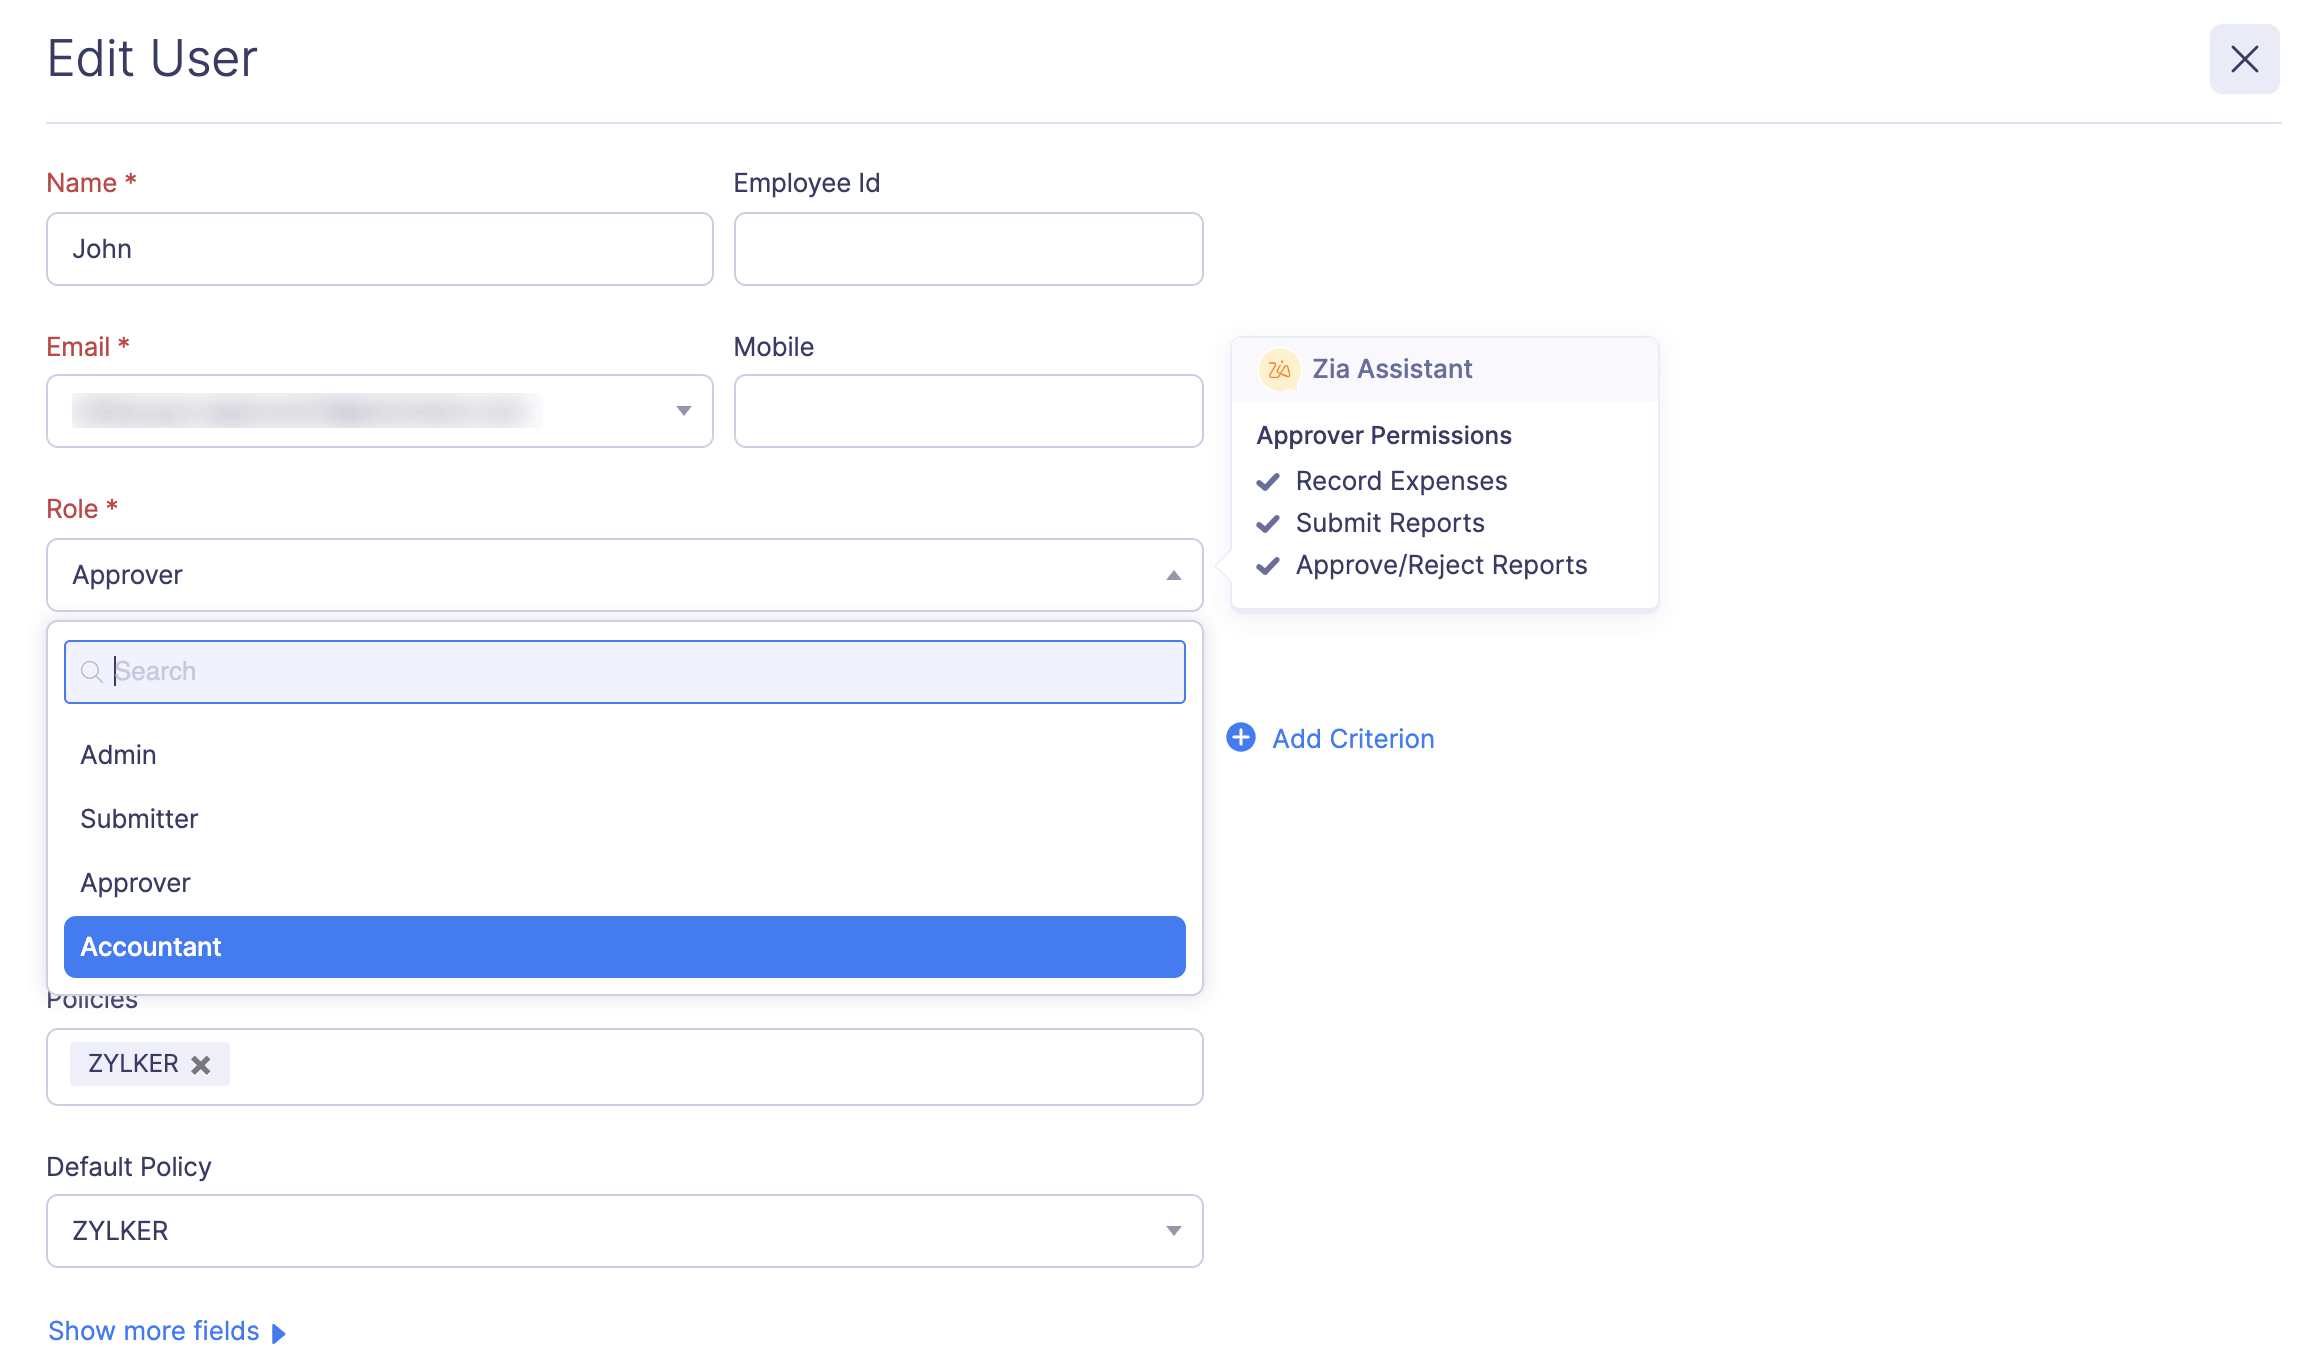 Assign Roles to Users